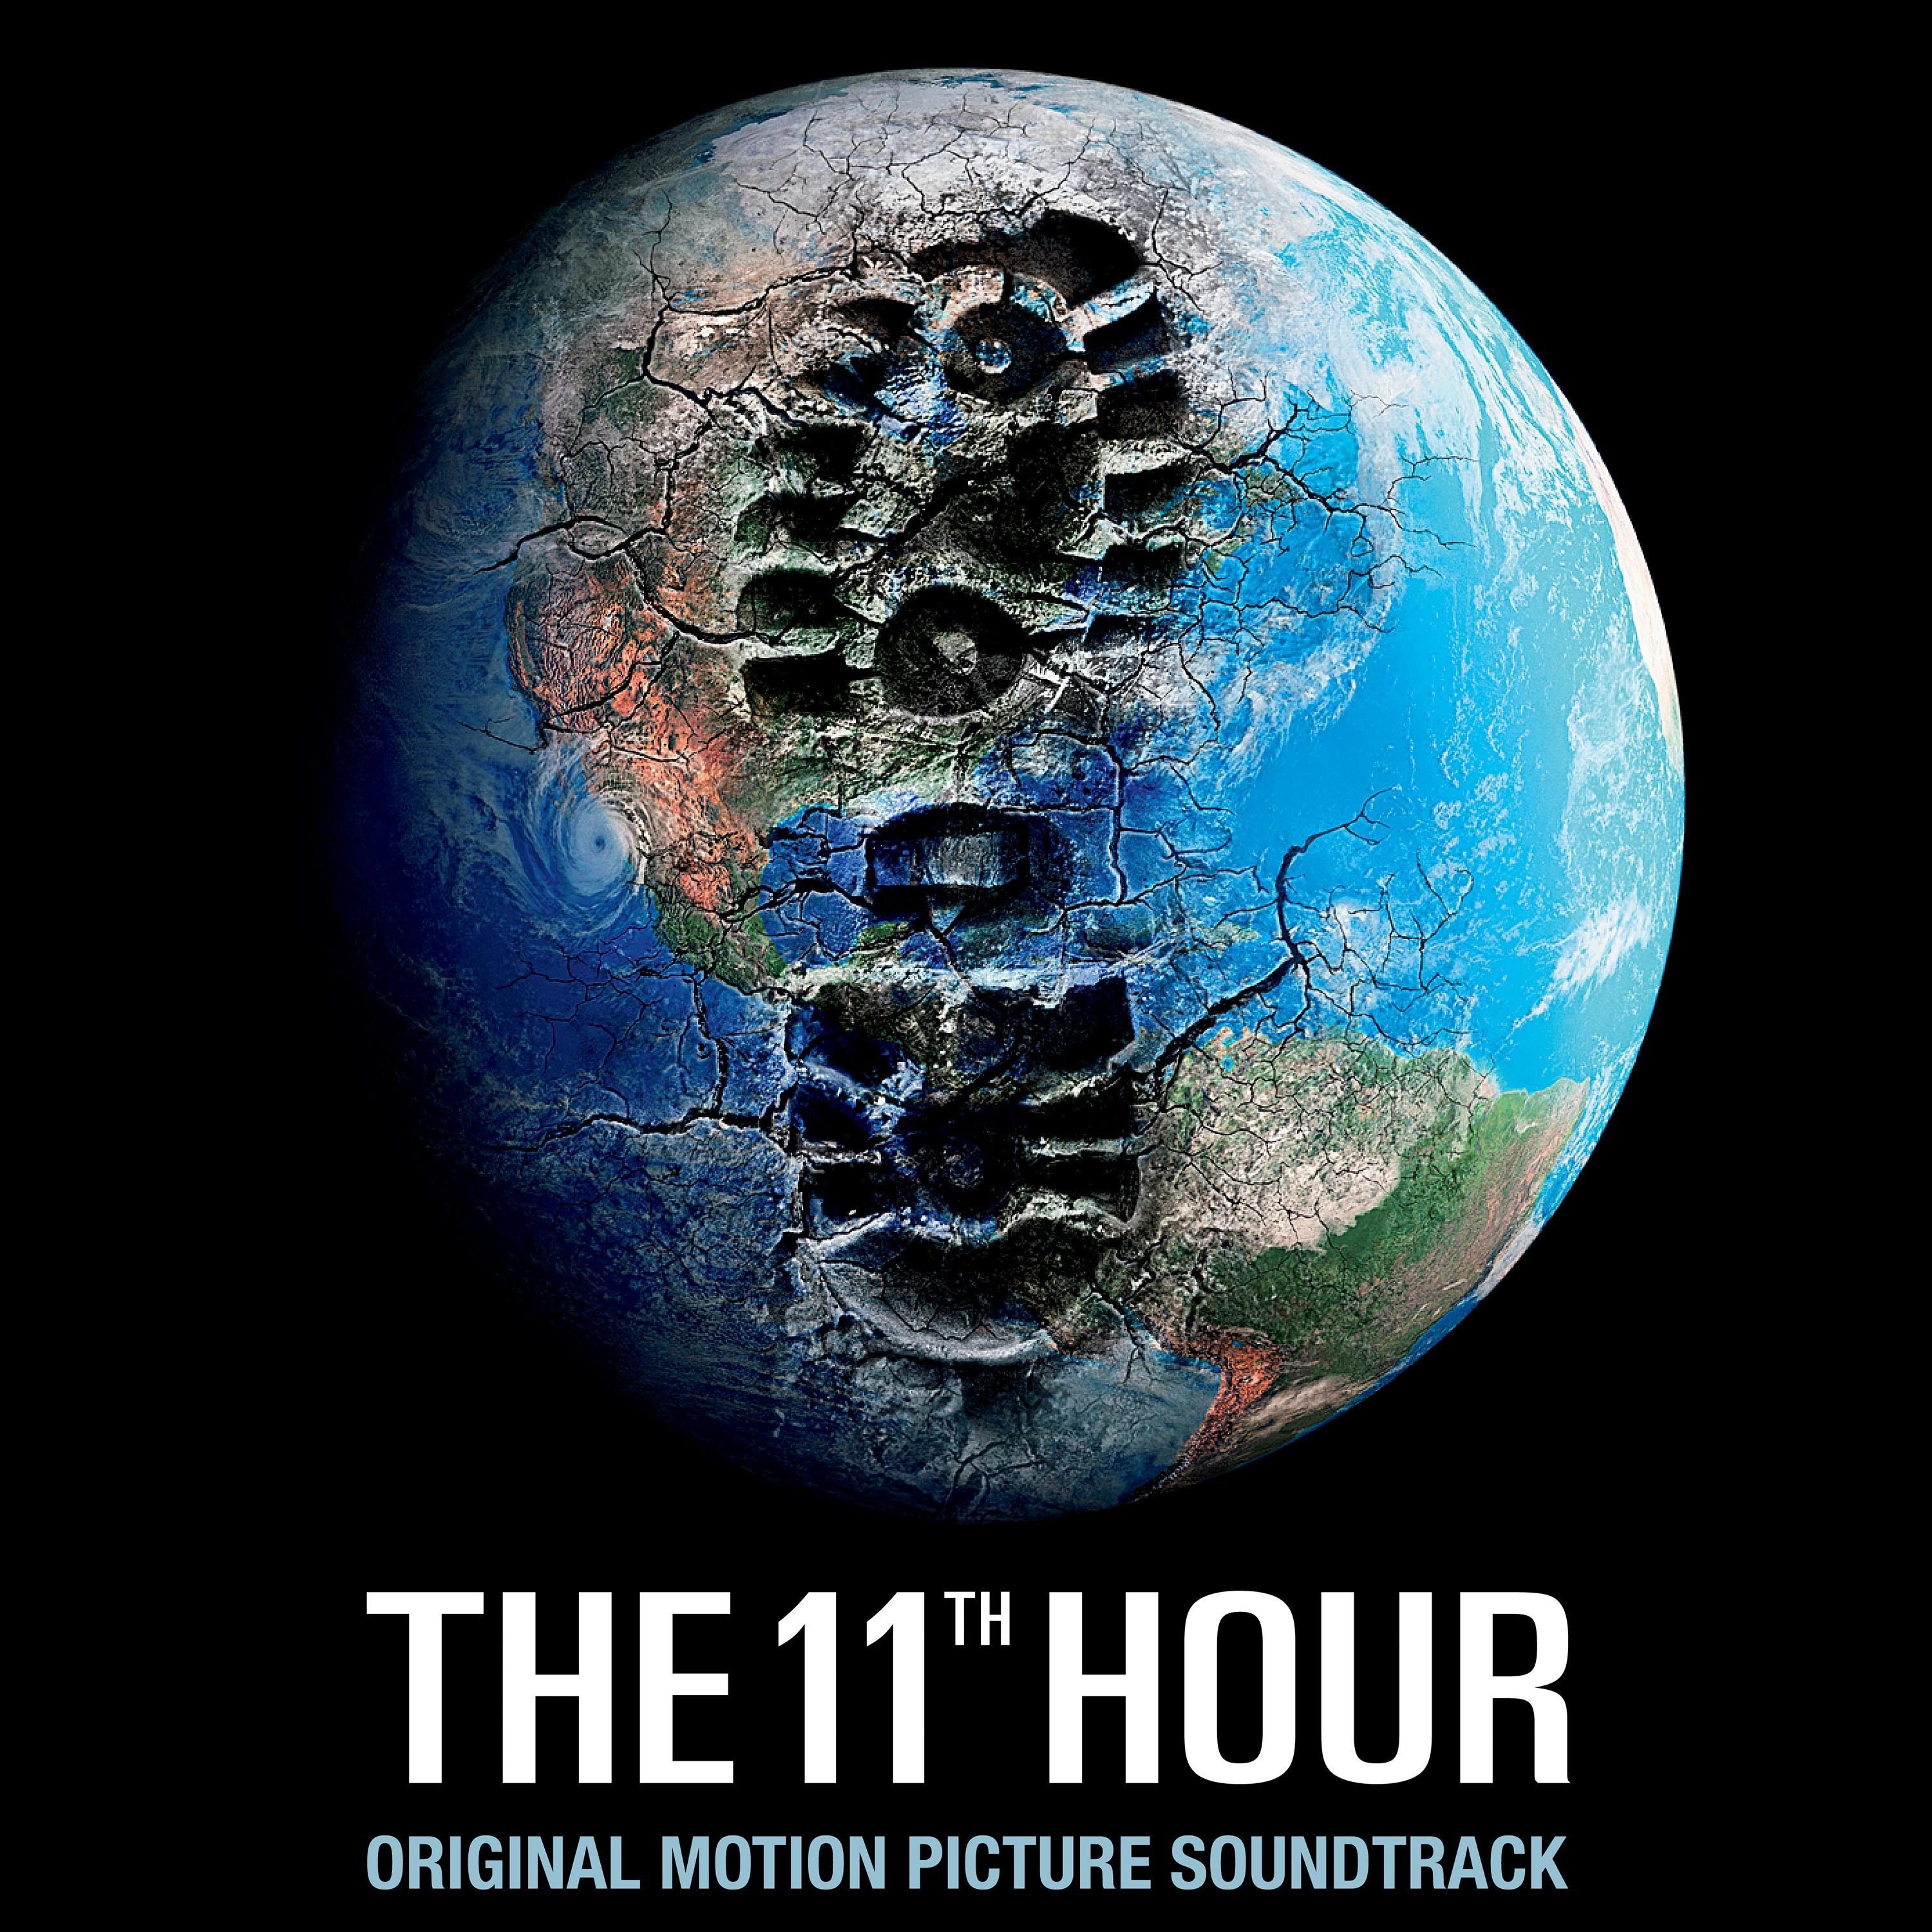 The 11th Hour (Original Motion Picture Soundtrack)